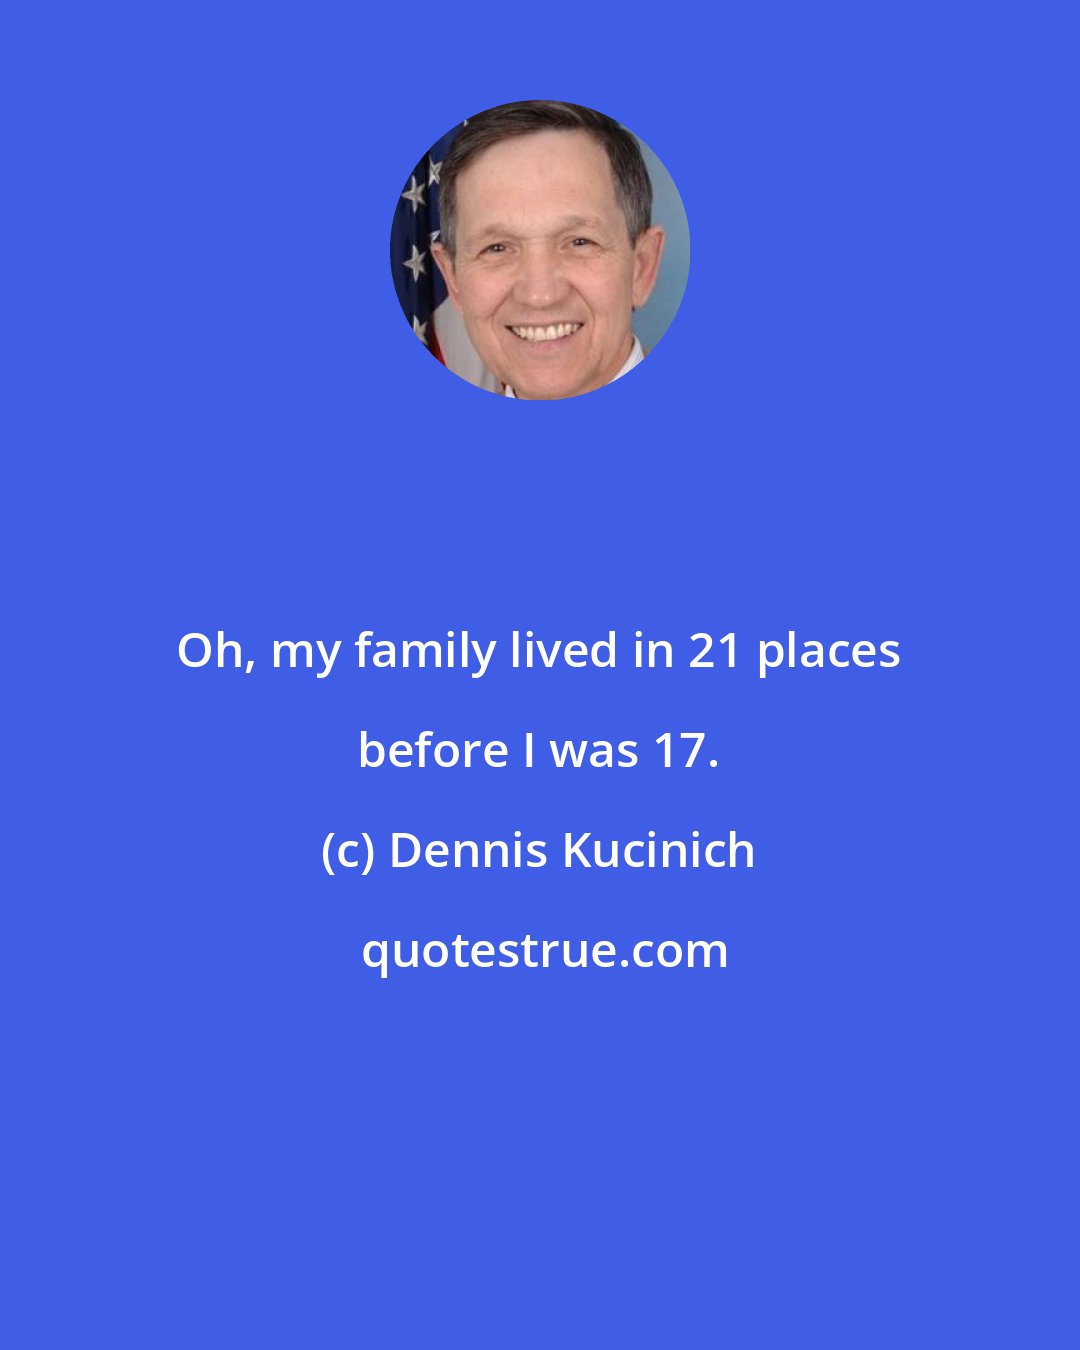 Dennis Kucinich: Oh, my family lived in 21 places before I was 17.